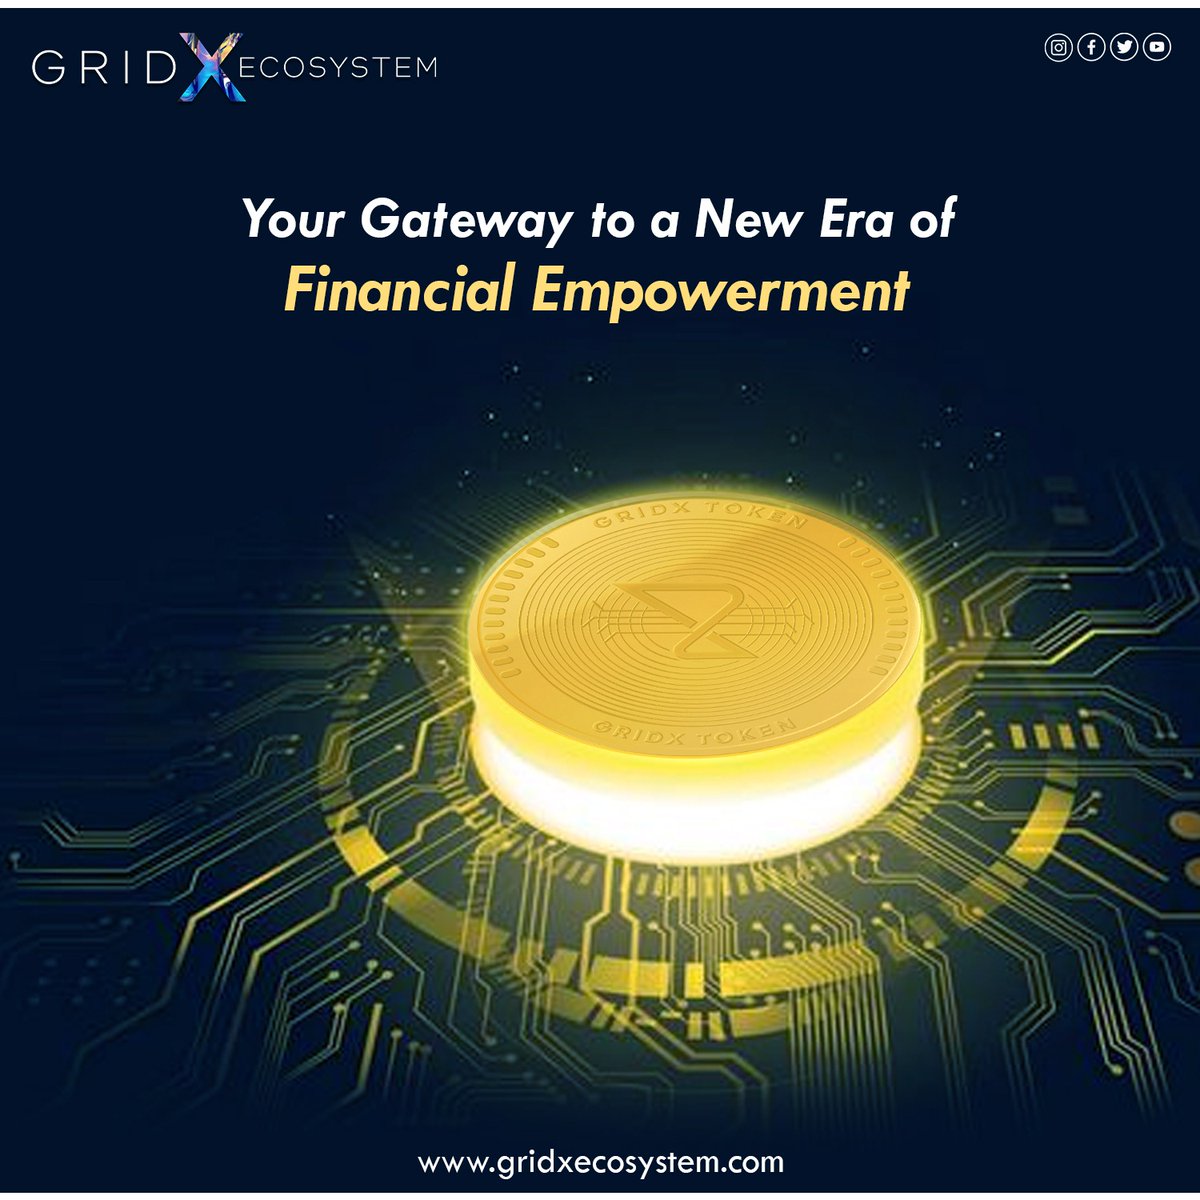 GridX Ecosystem: Your Gateway to a New Era of Financial Empowerment. Join us on this transformative journey towards financial freedom and unlock your true potential. . #GridXEcosystem #FinancialEmpowerment #NewEraFinance #UnlockYourPotential #FollowUs #ShareTheJourney